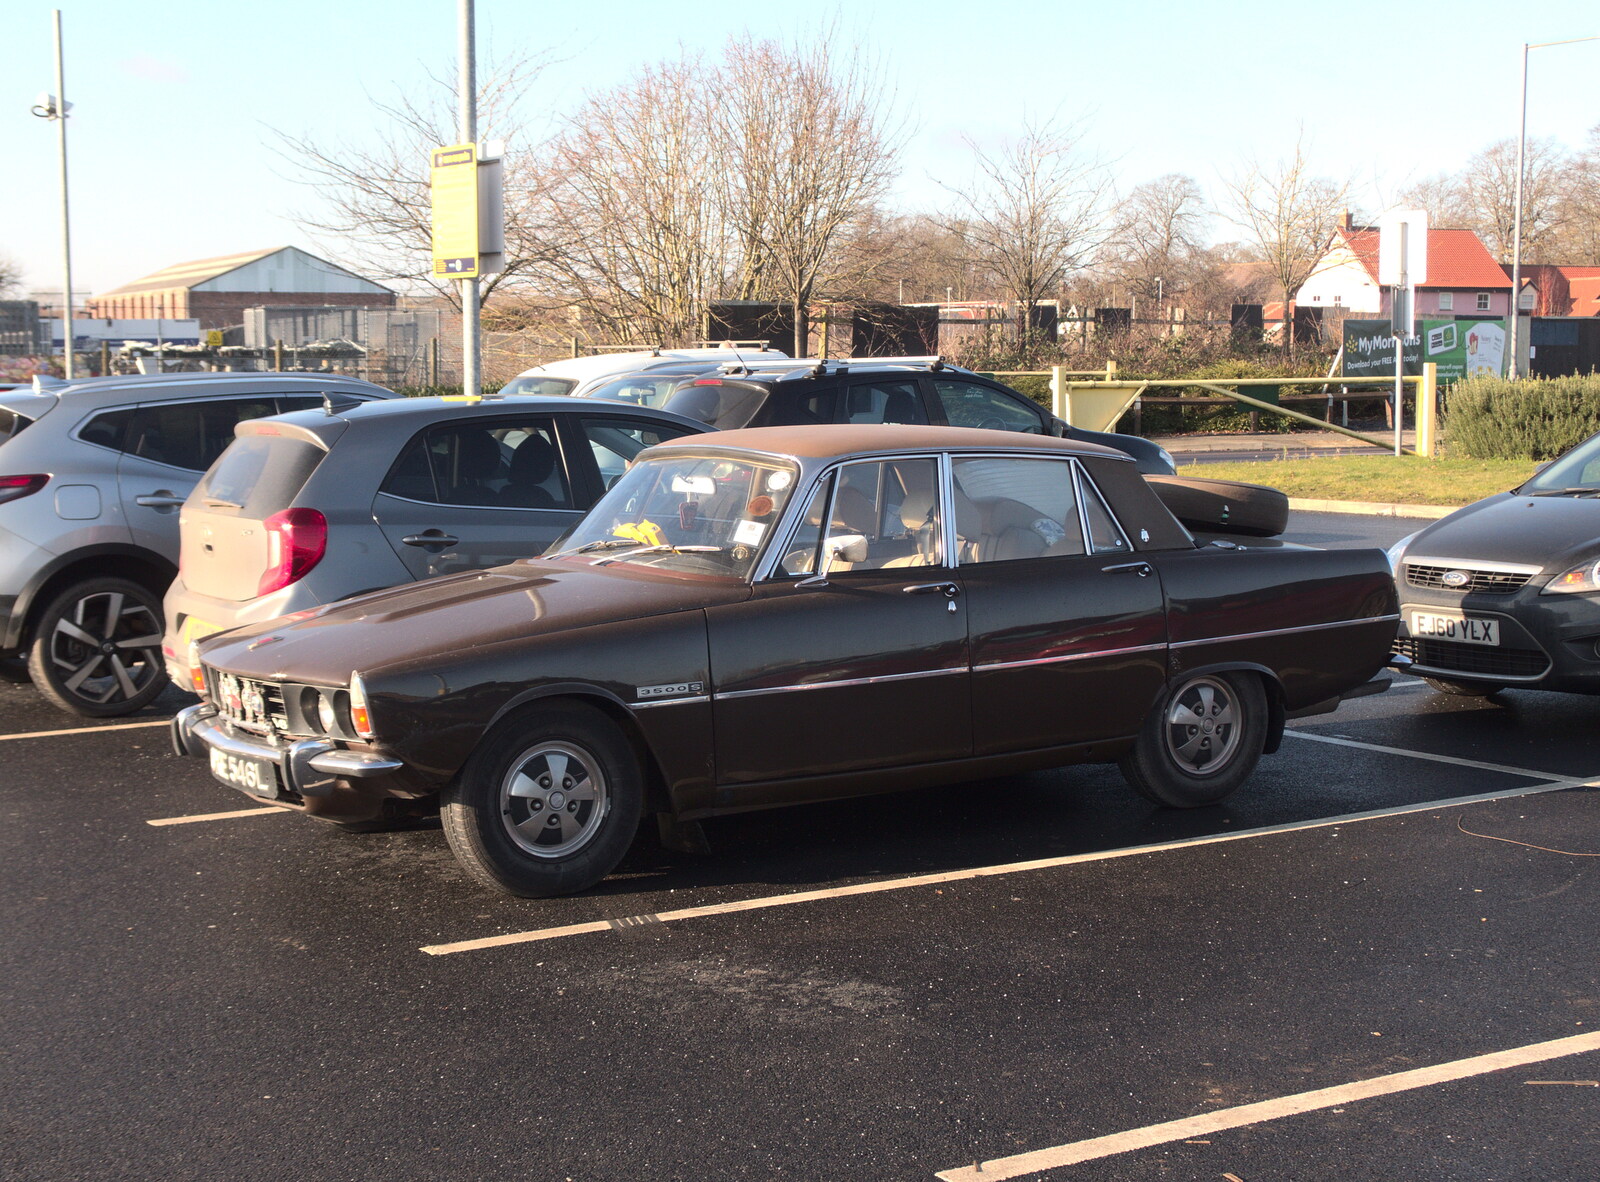 There's a nice 1972 Rover 3500S in Morrisons from Supercharged Electrons and Pizza at the Village Hall, Brome, Suffolk - 23rd January 2022